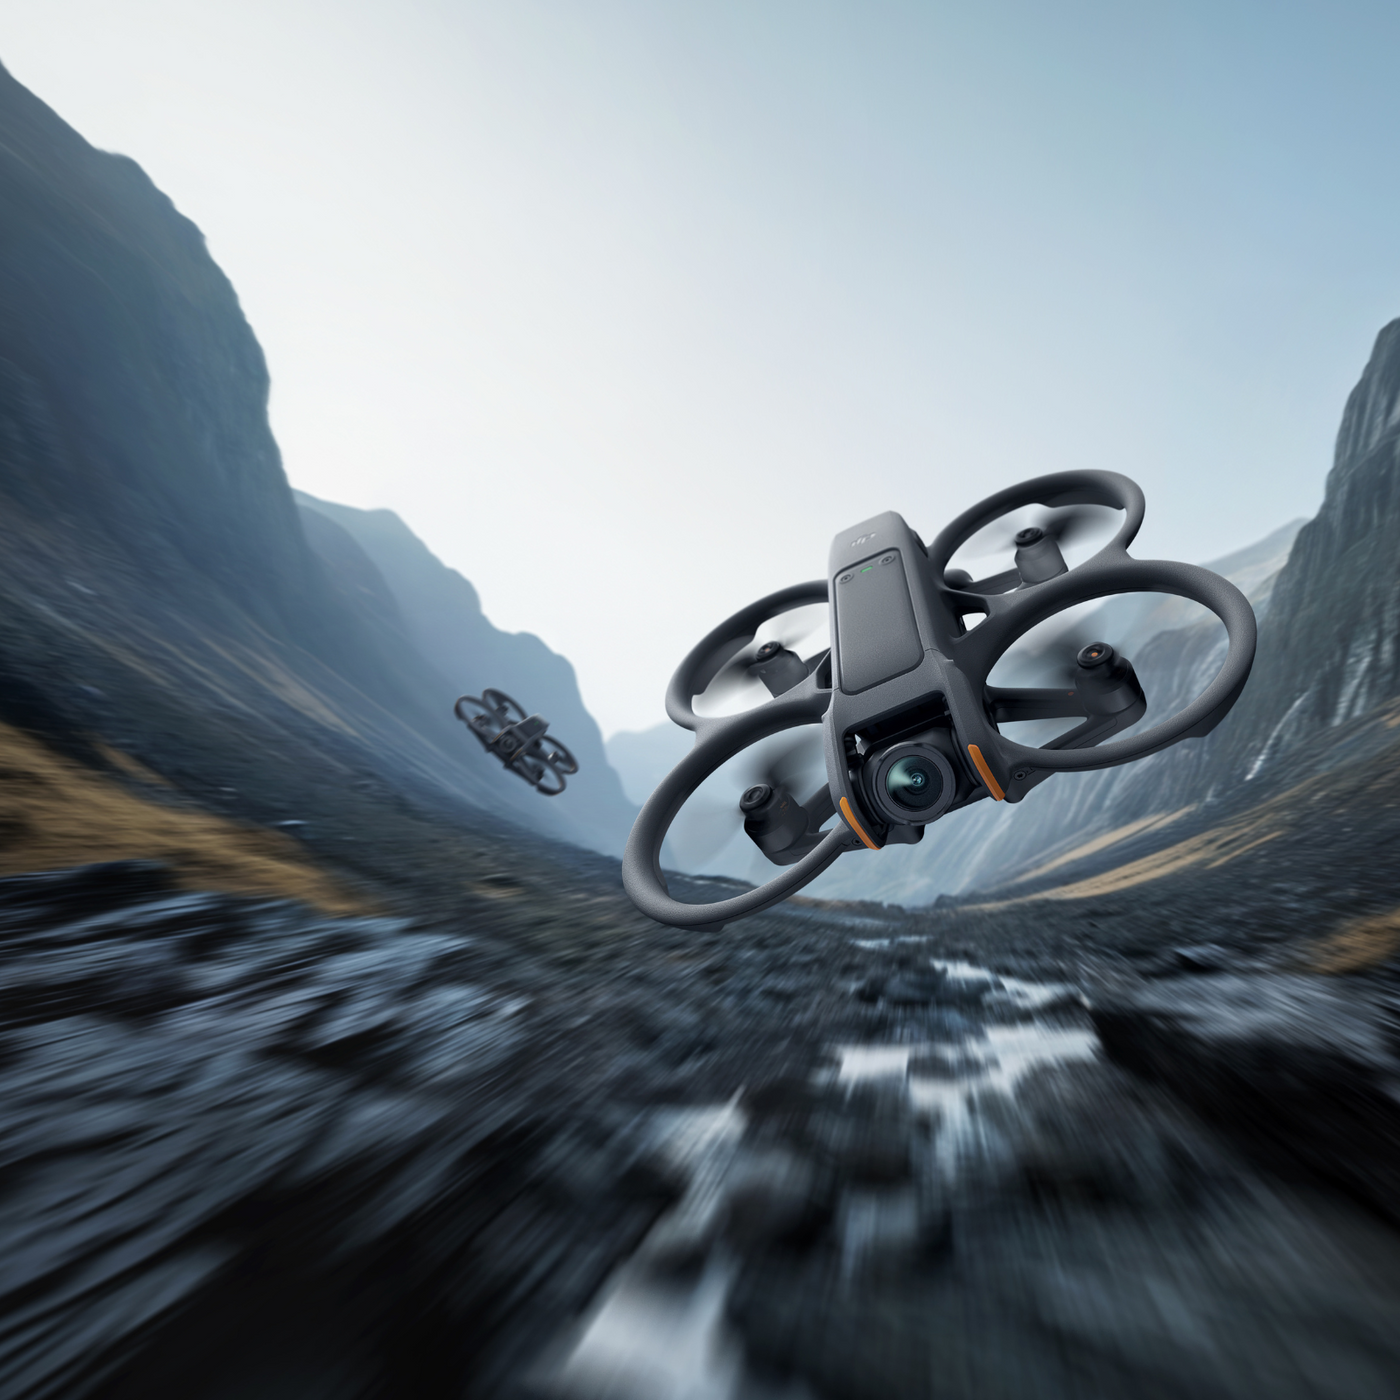 DJI Launches Avata 2. How Does It Compare To DJI Avata?